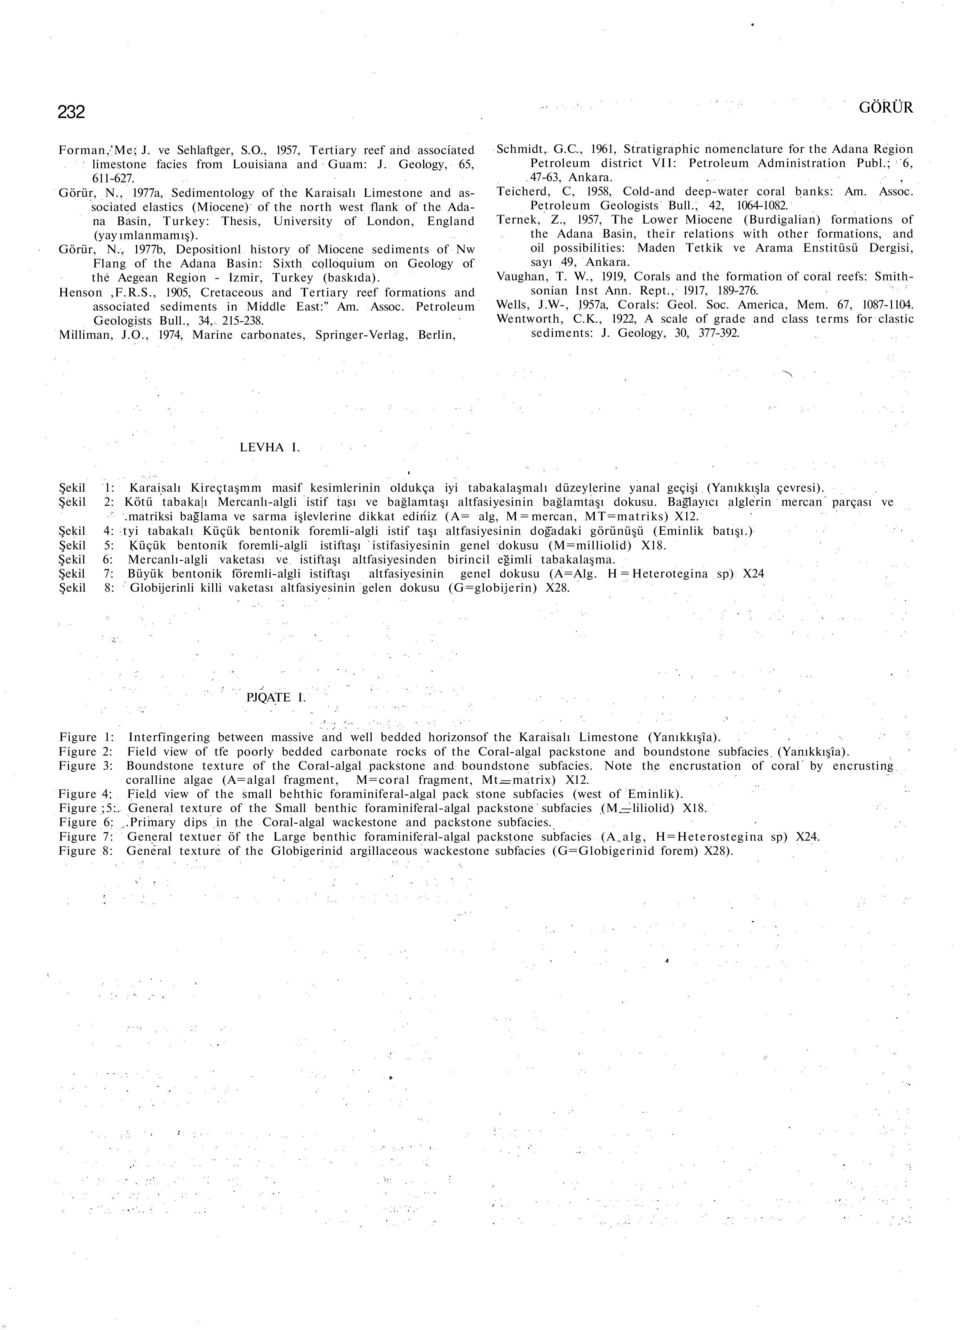 Görür, N., 1977b, Depositionl history of Miocene sediments of Nw Flang of the Adana Basin: Sixth colloquium on Geology of the Aegean Region - Izmir, Turkey (baskıda). Henson,F.R.S., 1905, Cretaceous and Tertiary reef formations and associated sediments in Middle East:" Am.